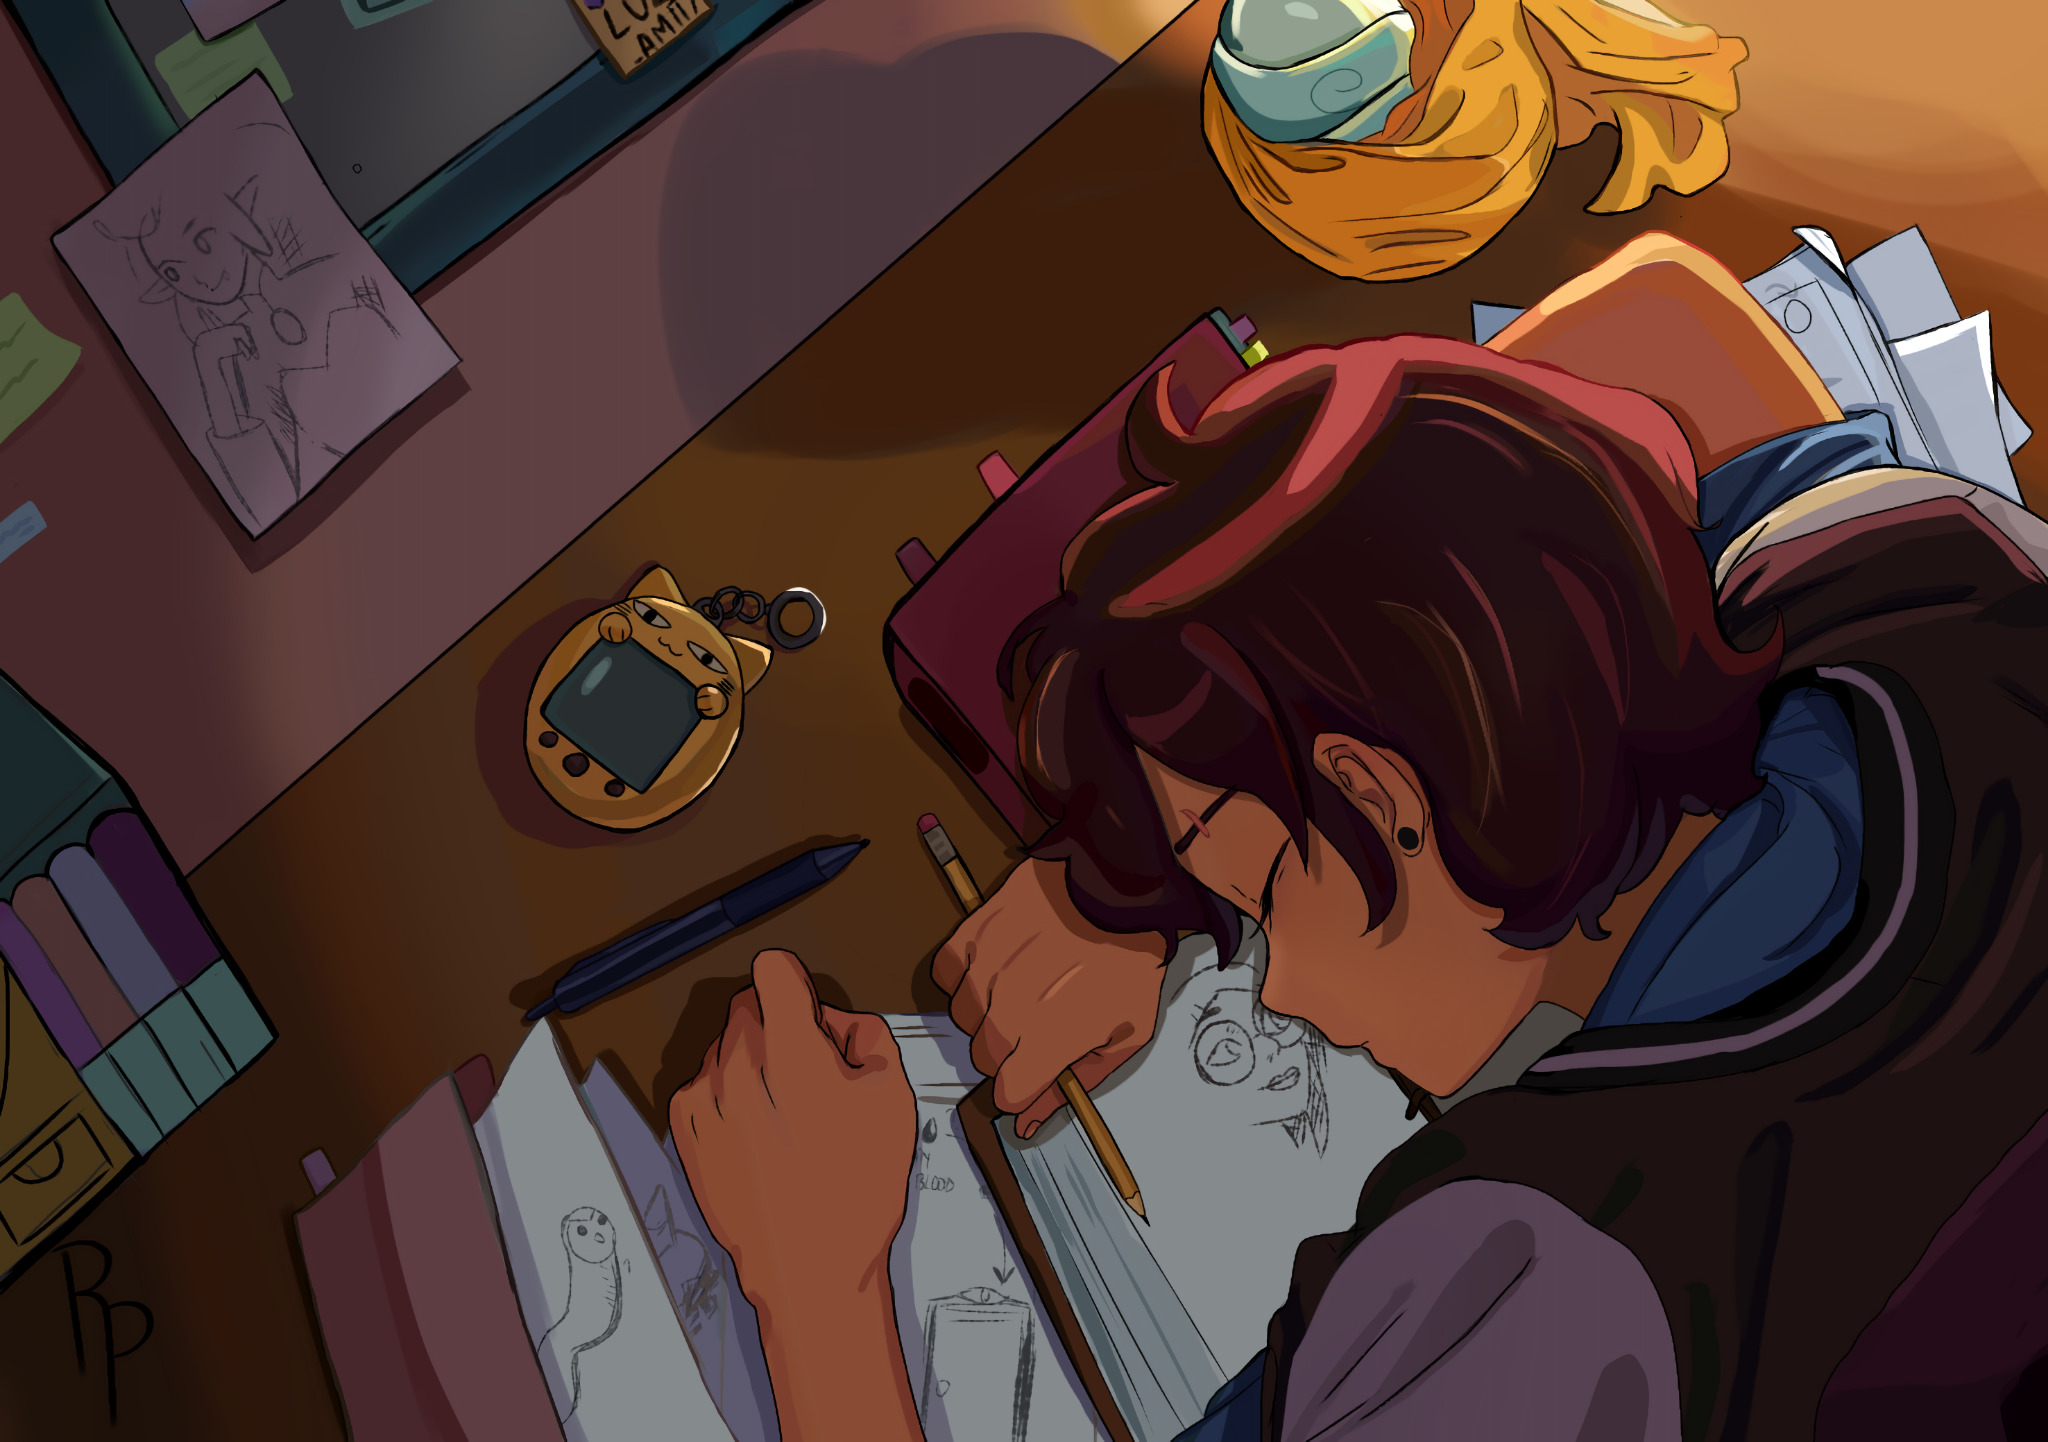 Artwork by Realyskp of Luz Noceda falling asleep while drawing sketches of her friends.